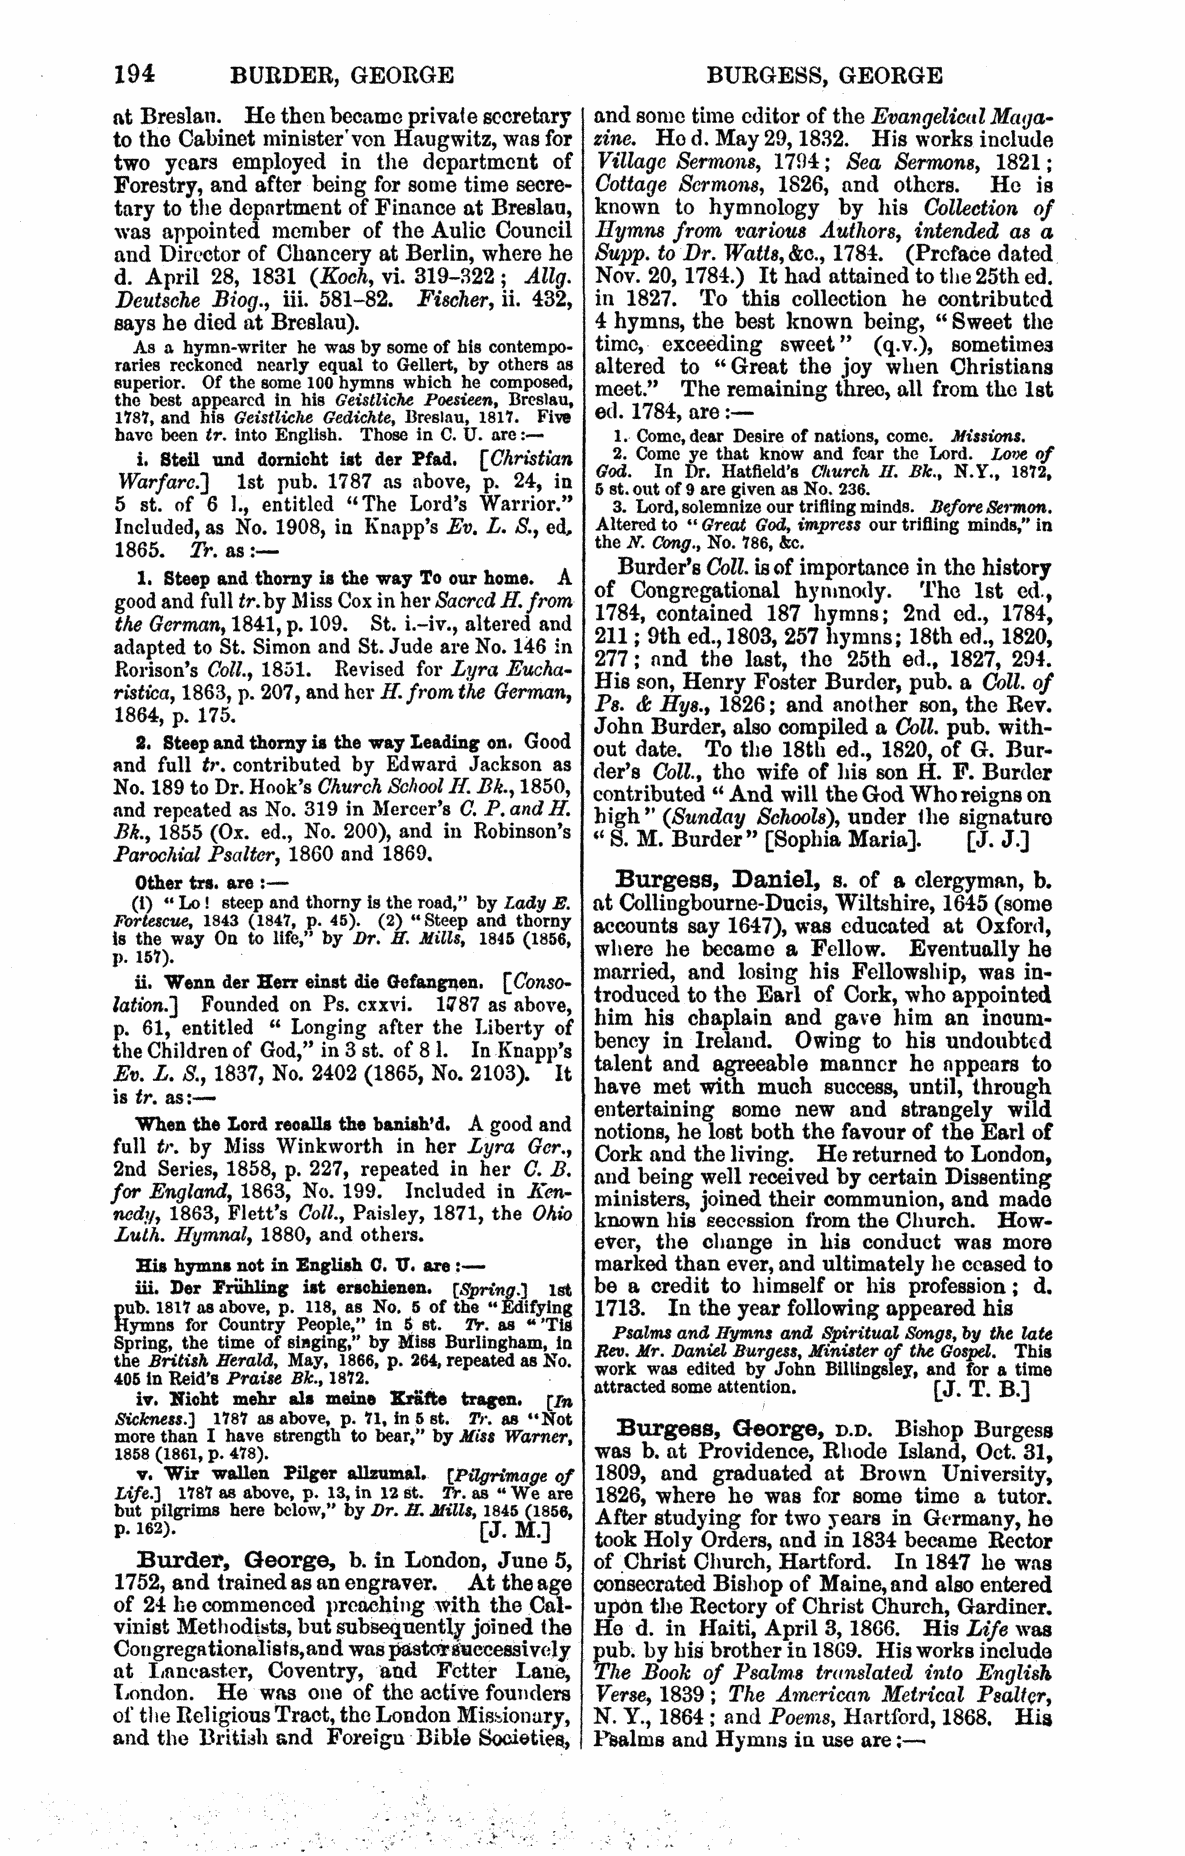 Image of page 194